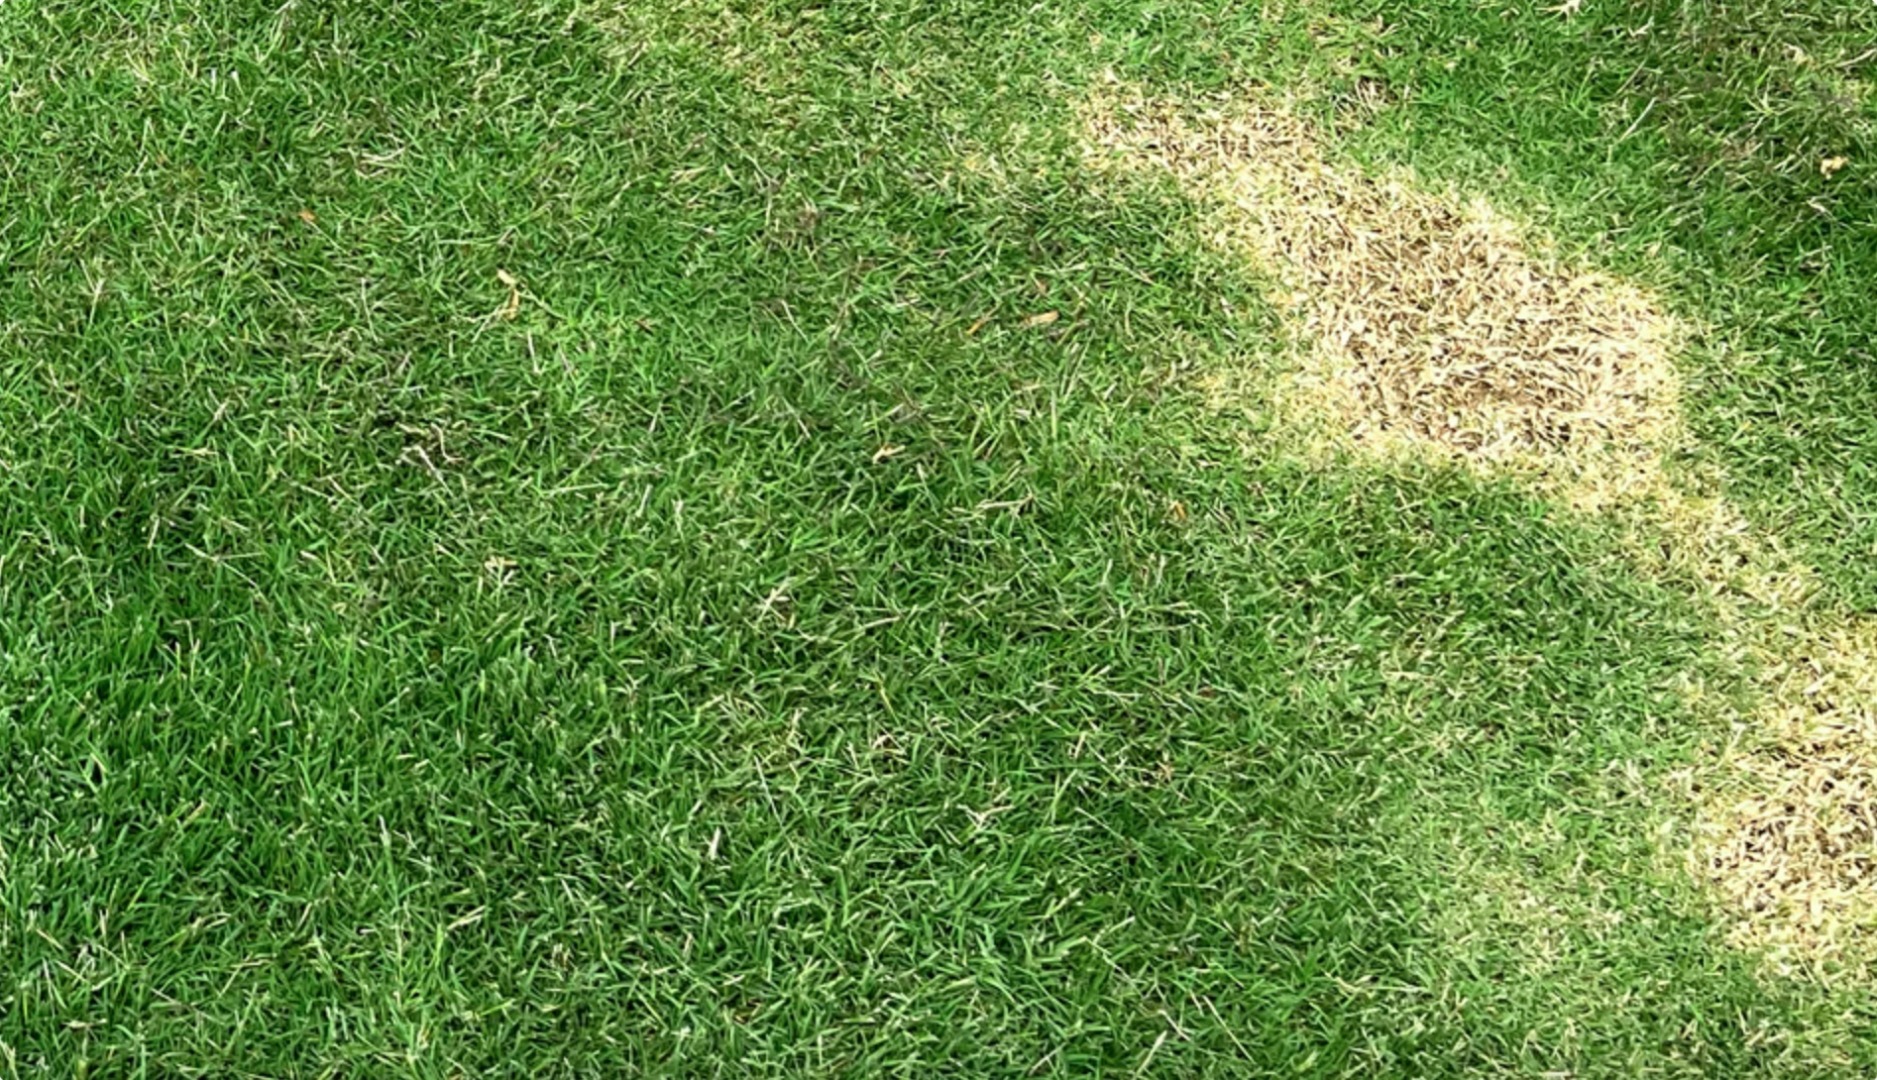 How to Stop Patches from Scalping While Mowing